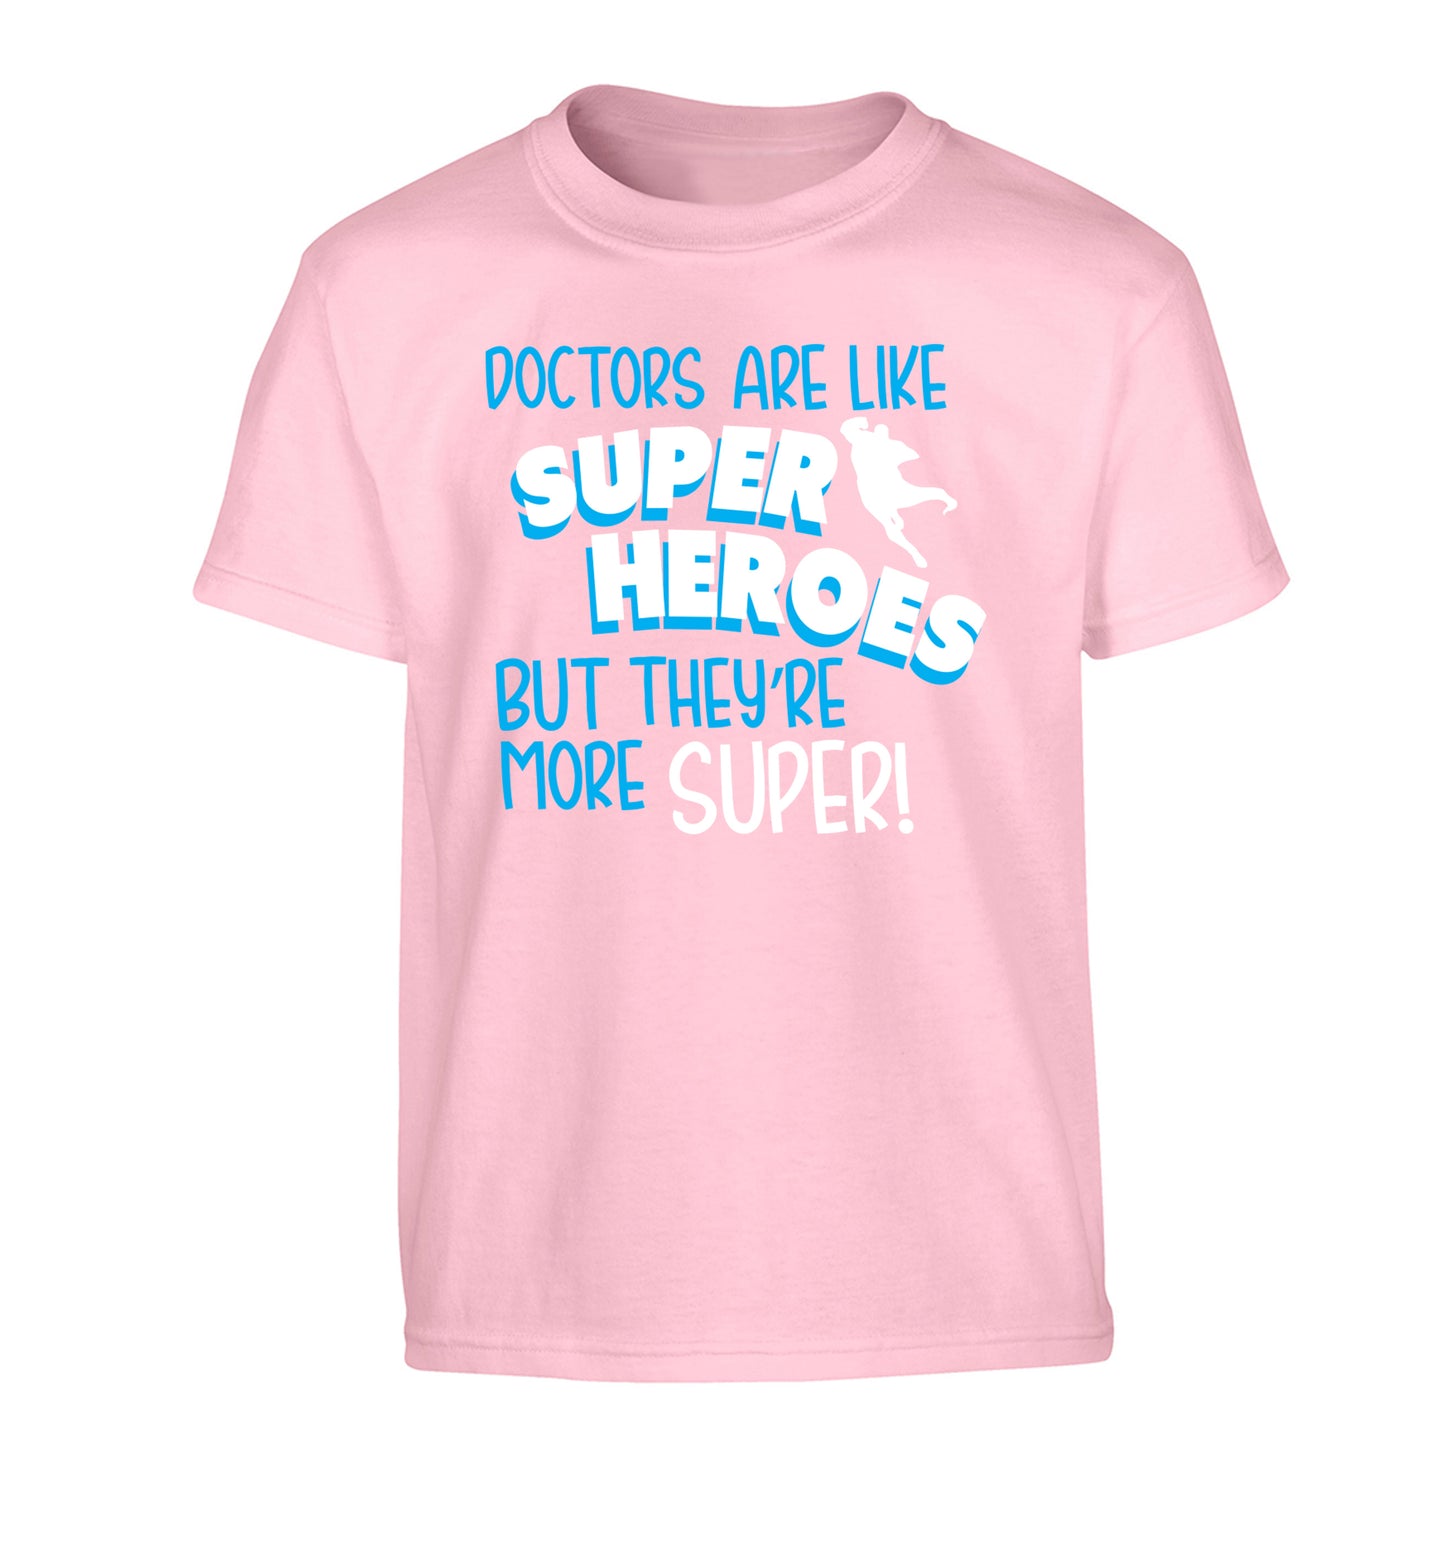 Doctors are like superheros but they're more super Children's light pink Tshirt 12-13 Years